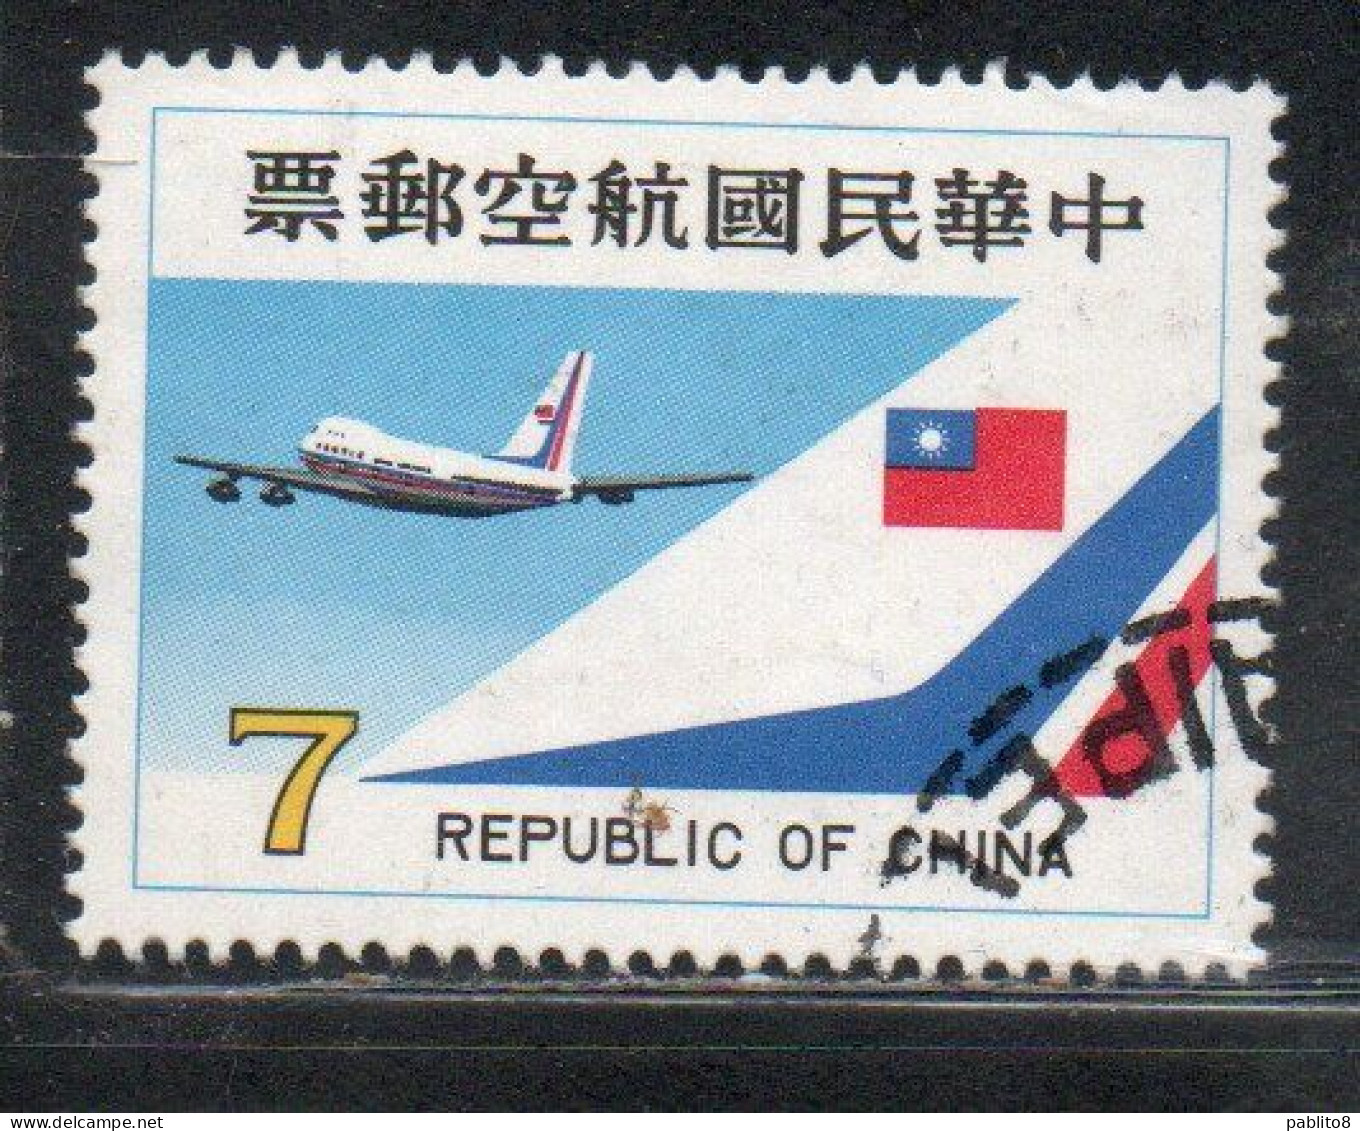 CHINA REPUBLIC CINA TAIWAN FORMOSA 1980 AIR POST MAIL AIRMAIL CHINA AIRLINES JET 7$ USED USATO OBLITERE' - Poste Aérienne